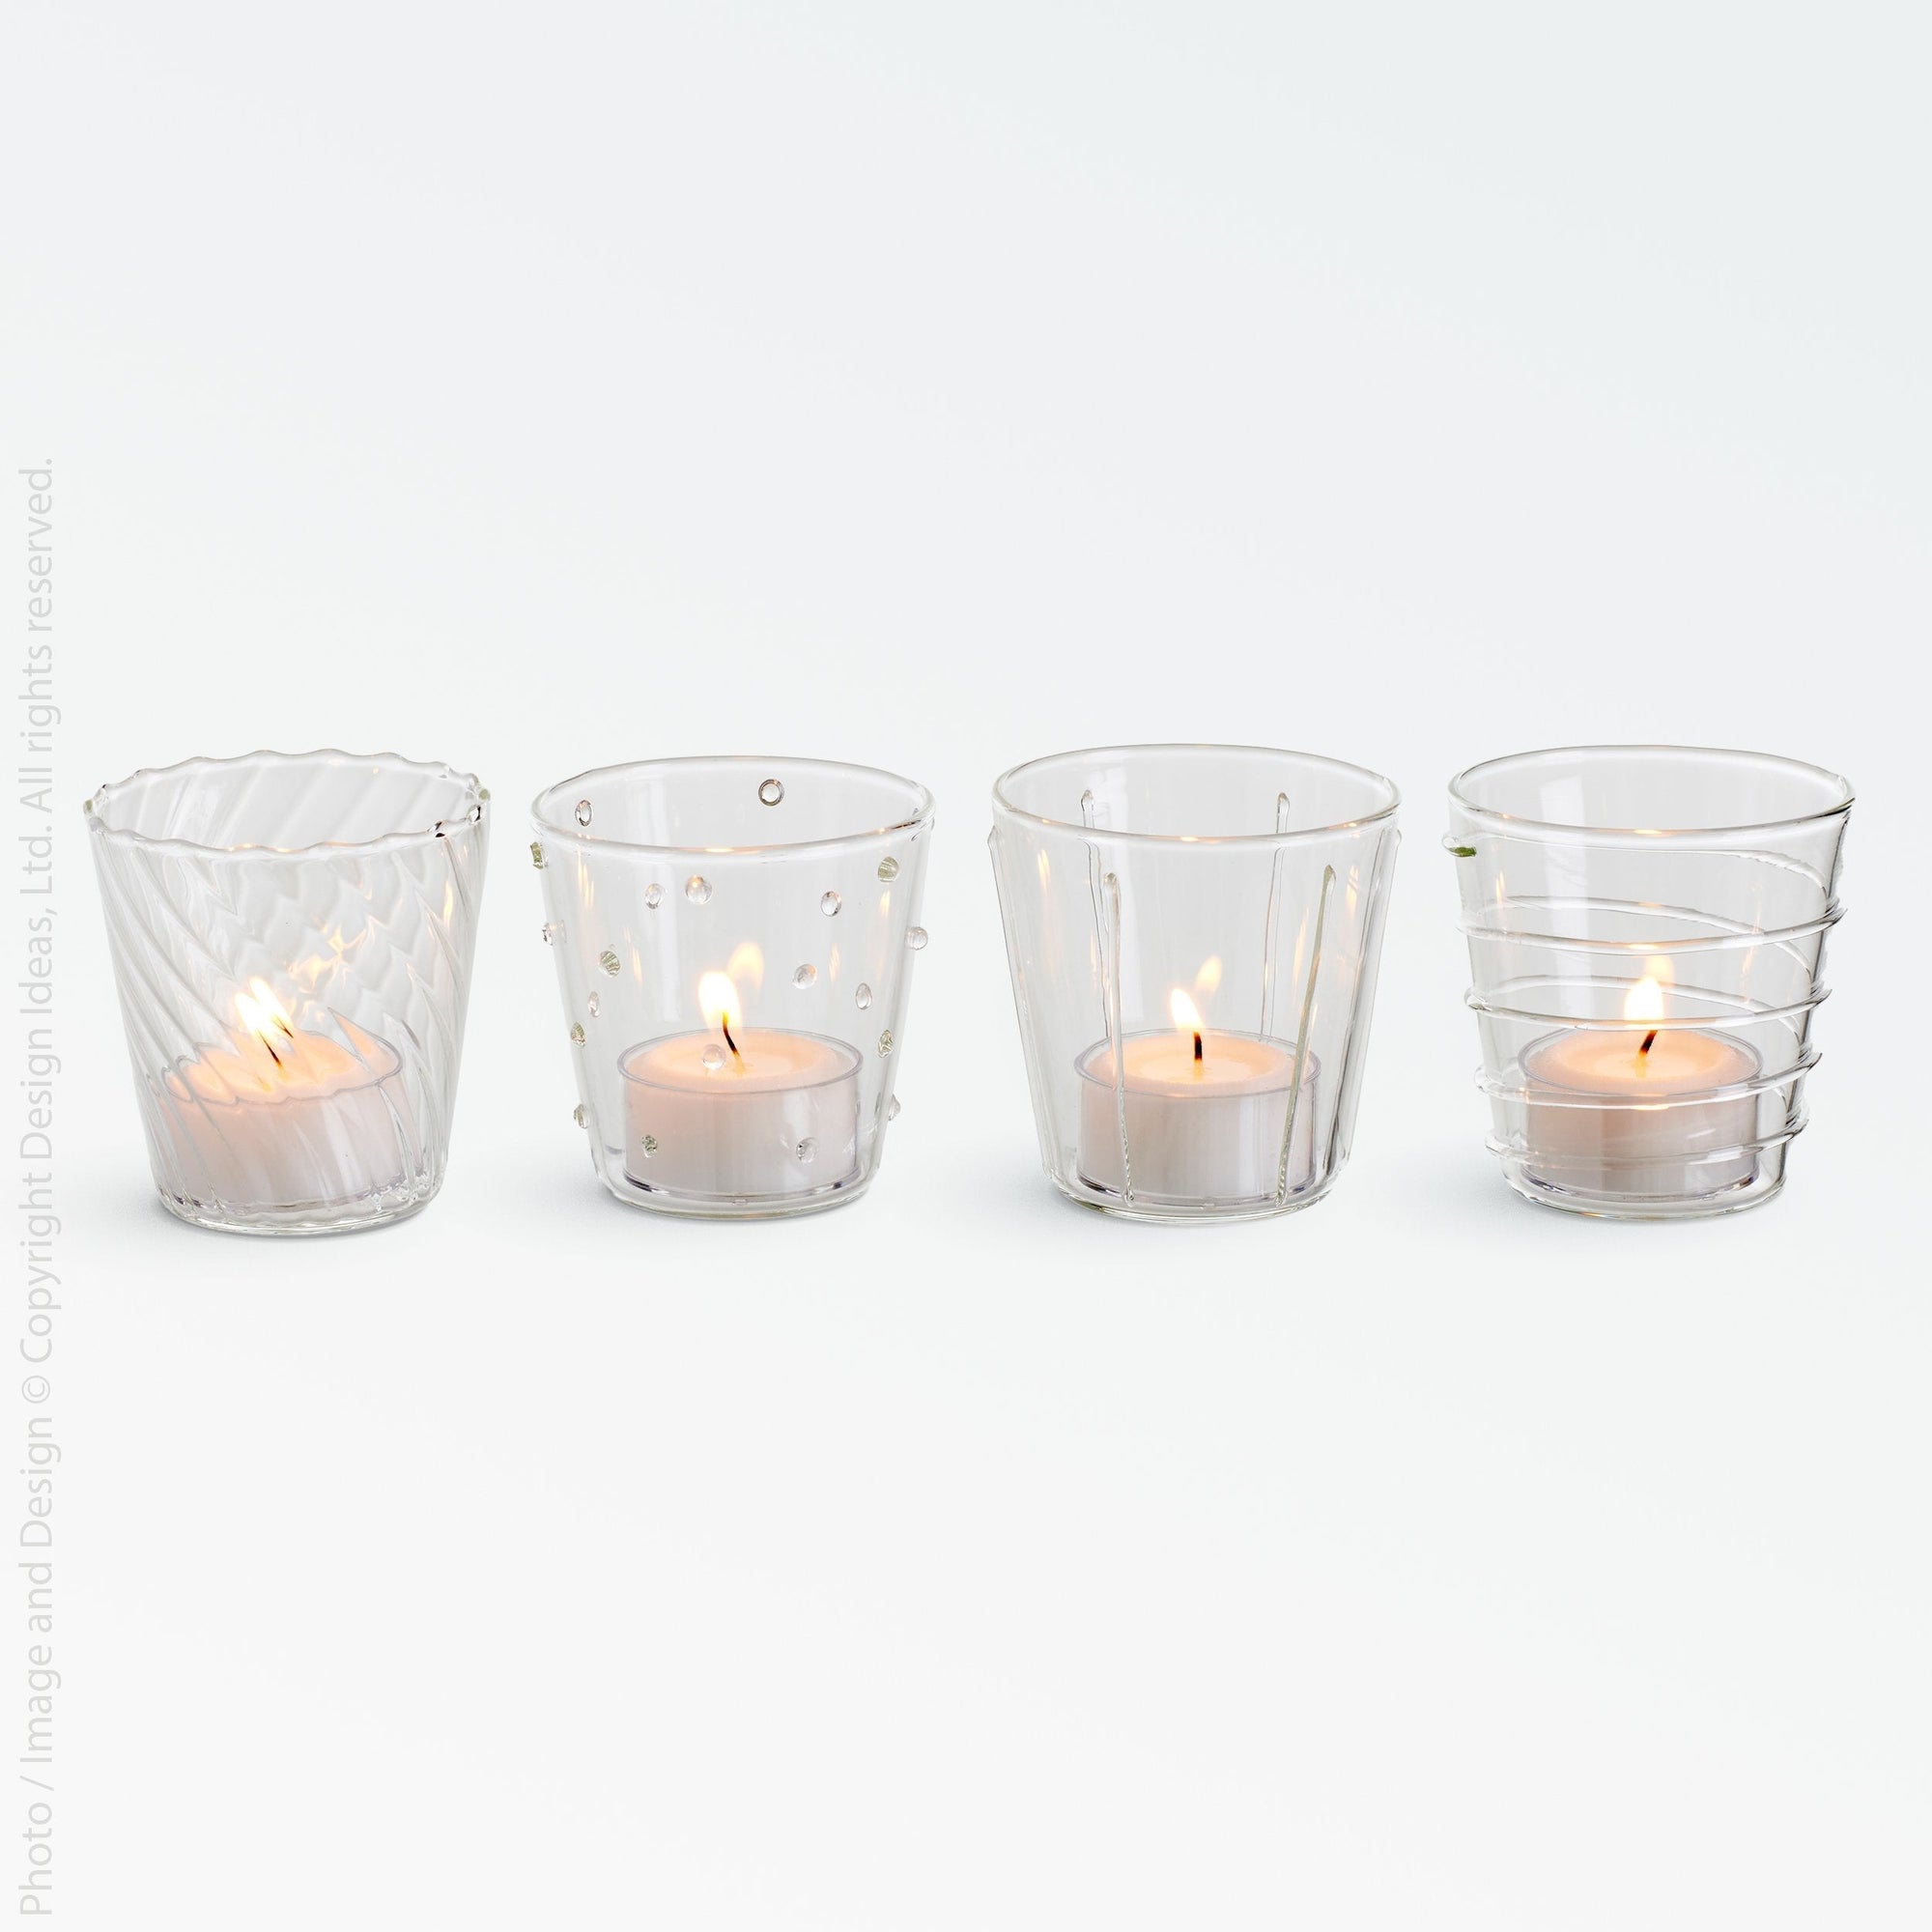 Livenza™ votive cup (set of 4) - Clear | Image 1 | Premium Candleholder from the Livenza collection | made with Borosilicate Glass for long lasting use | texxture